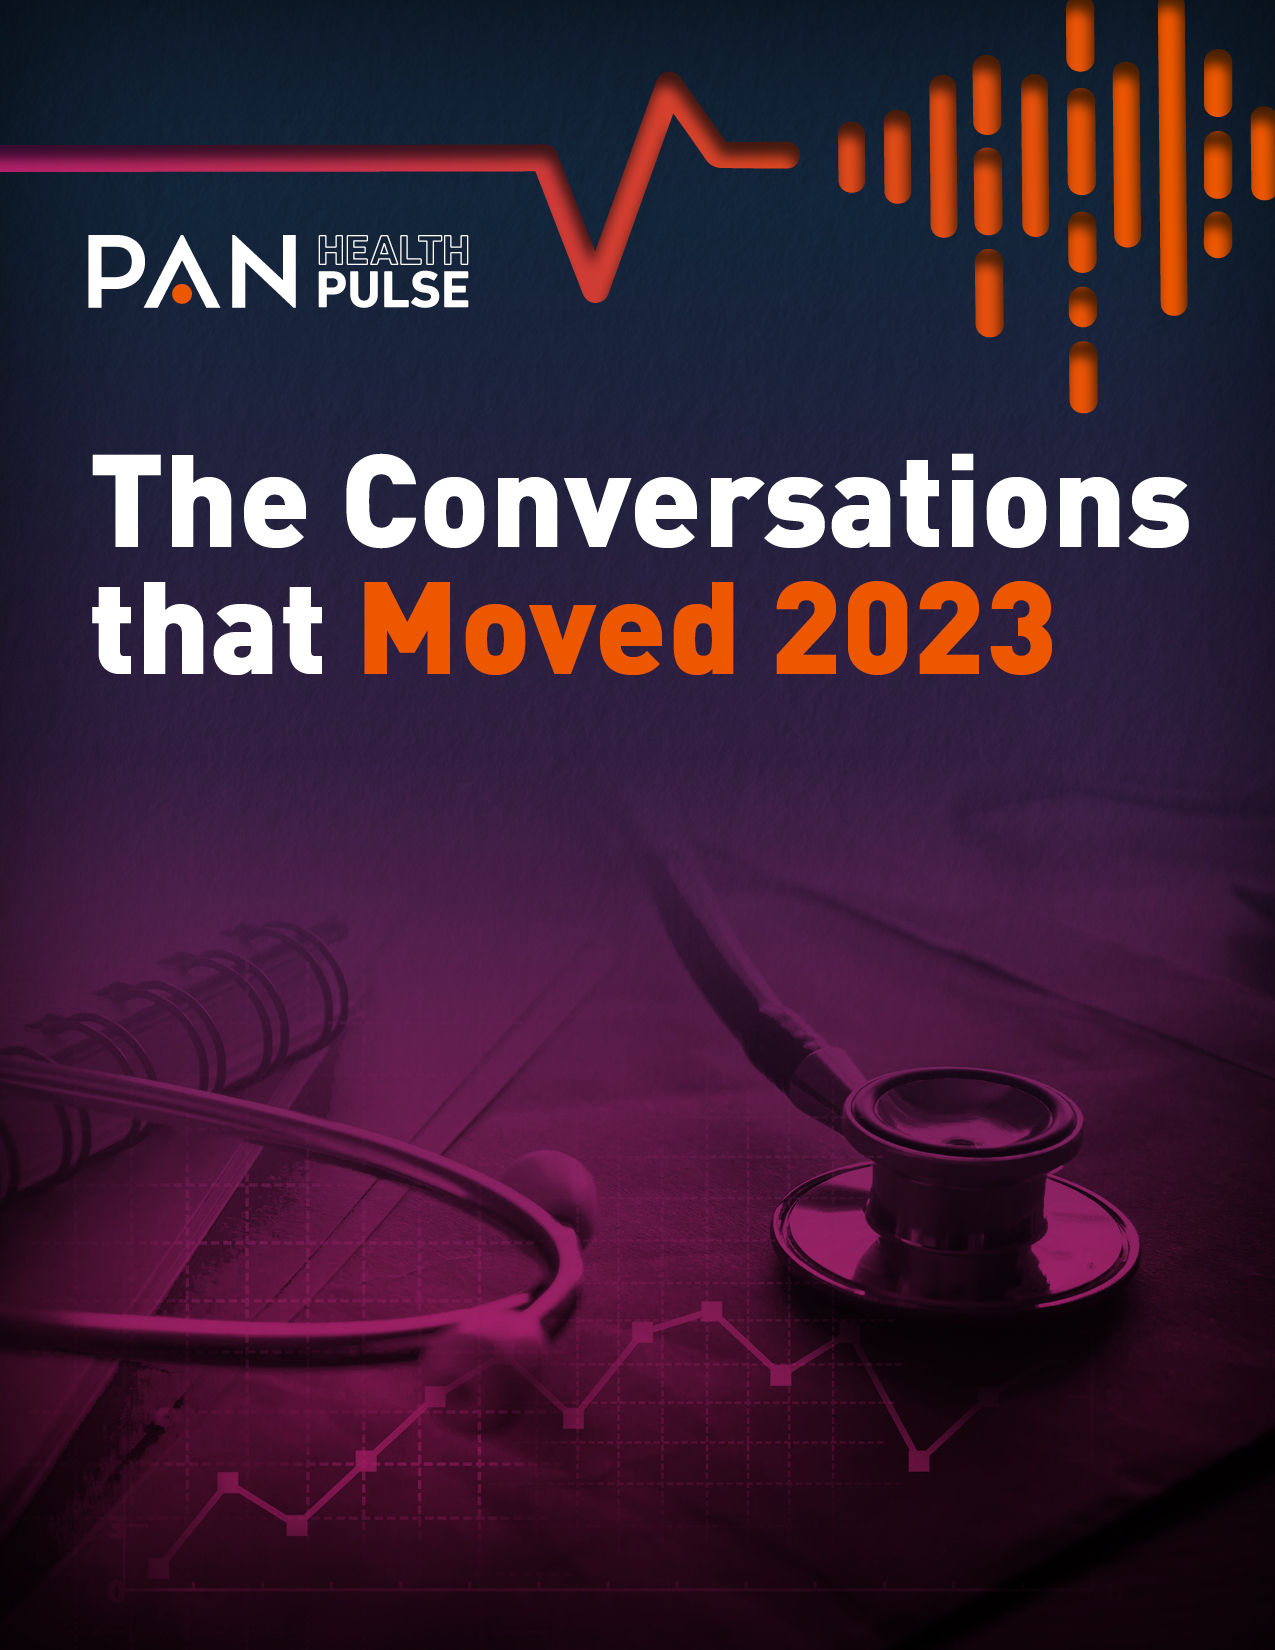 HealthPulse: The Conversations that Moved 2023 | PAN Communications